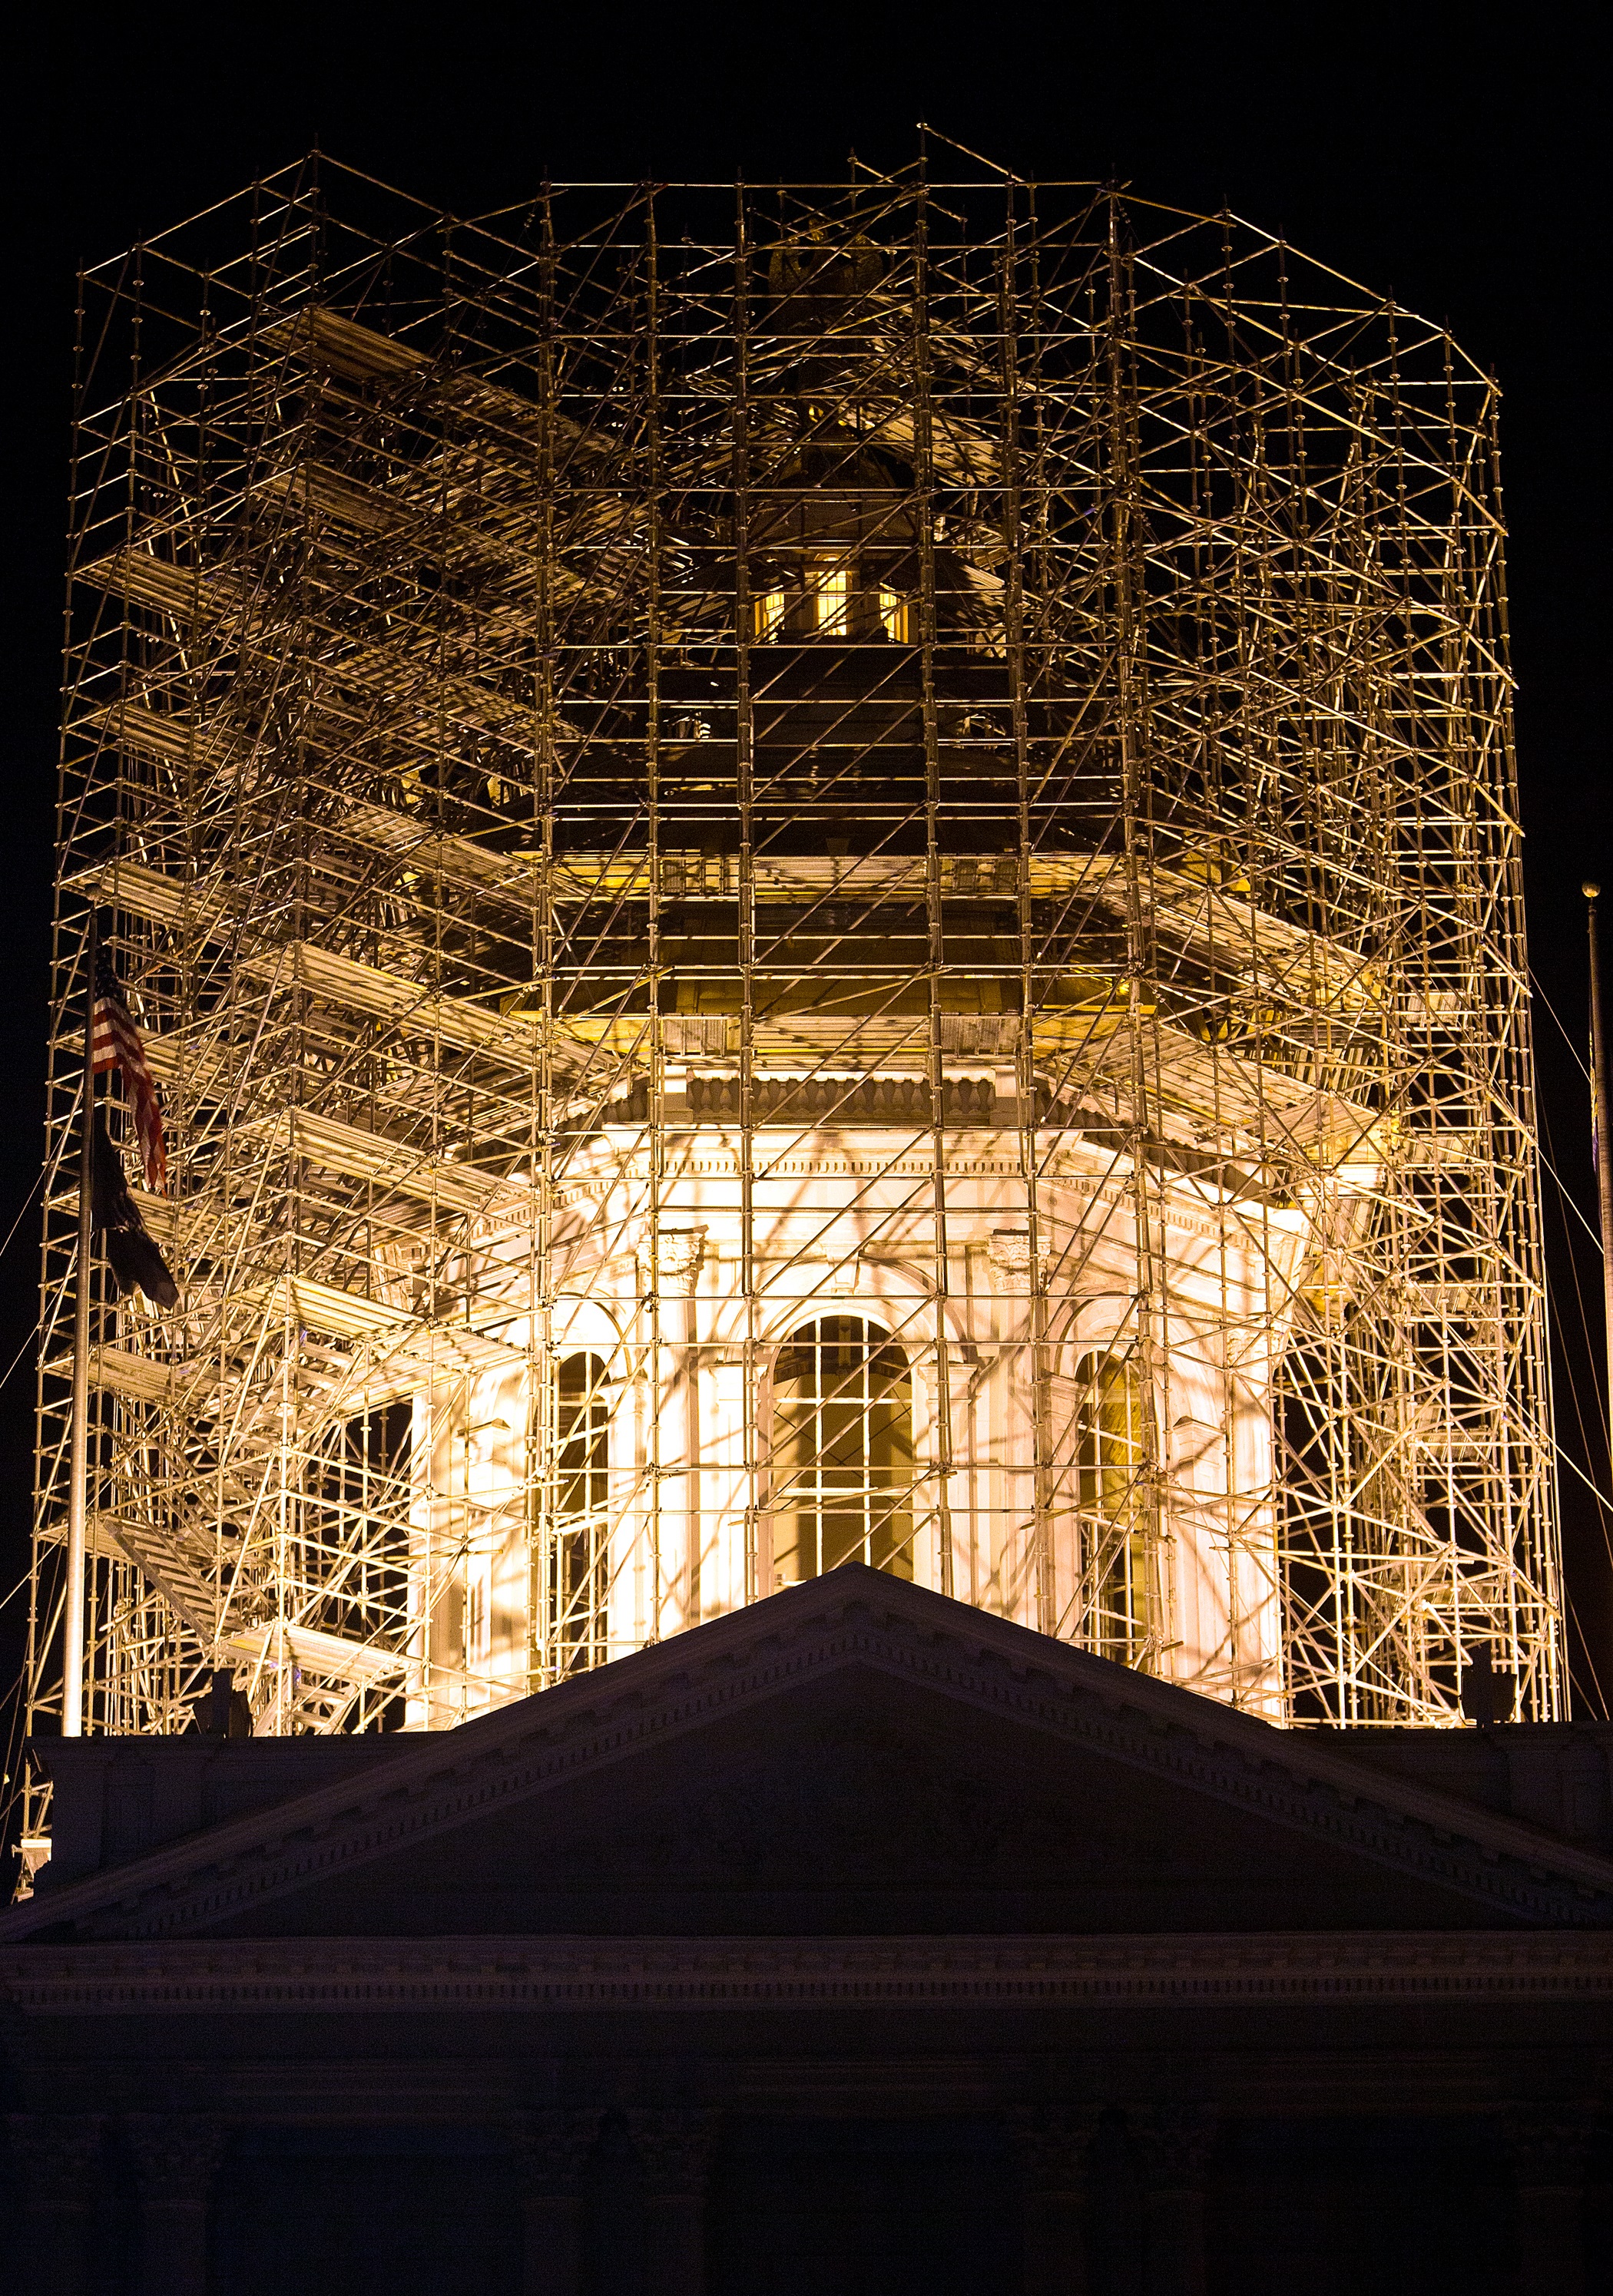 Putting scaffolding around a 200-year-old State house dome is not trivial